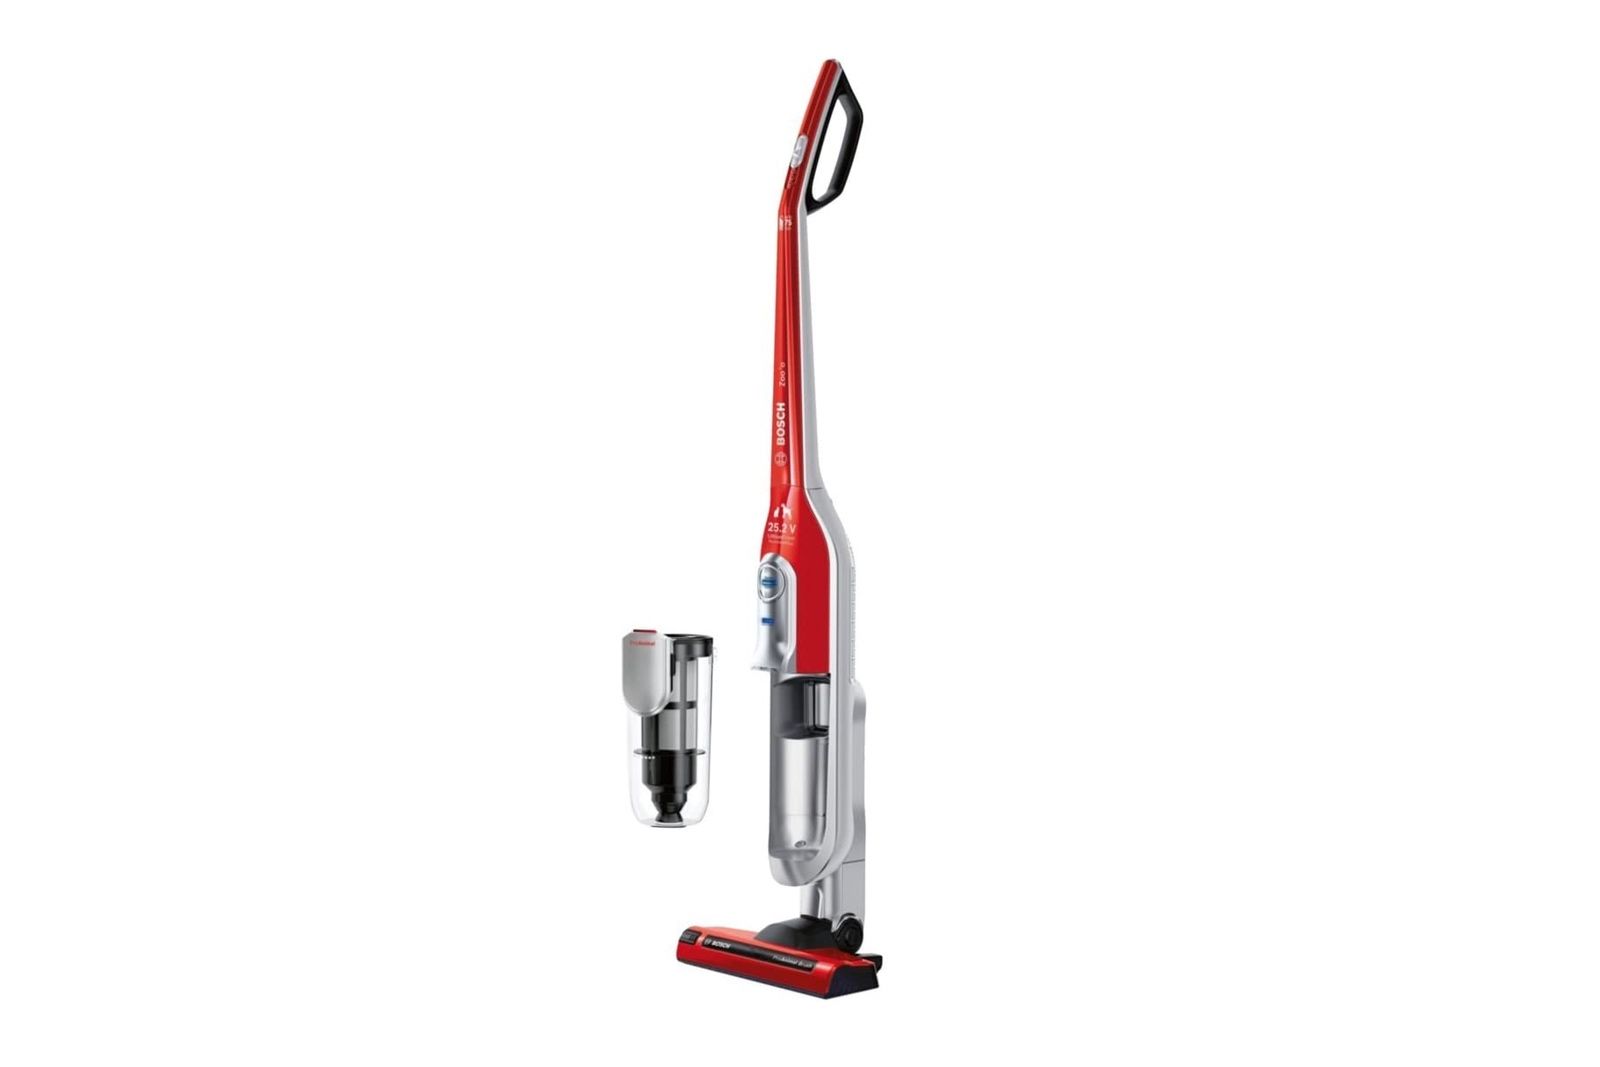 Best upright vacuum cleaner for 2020 image 6